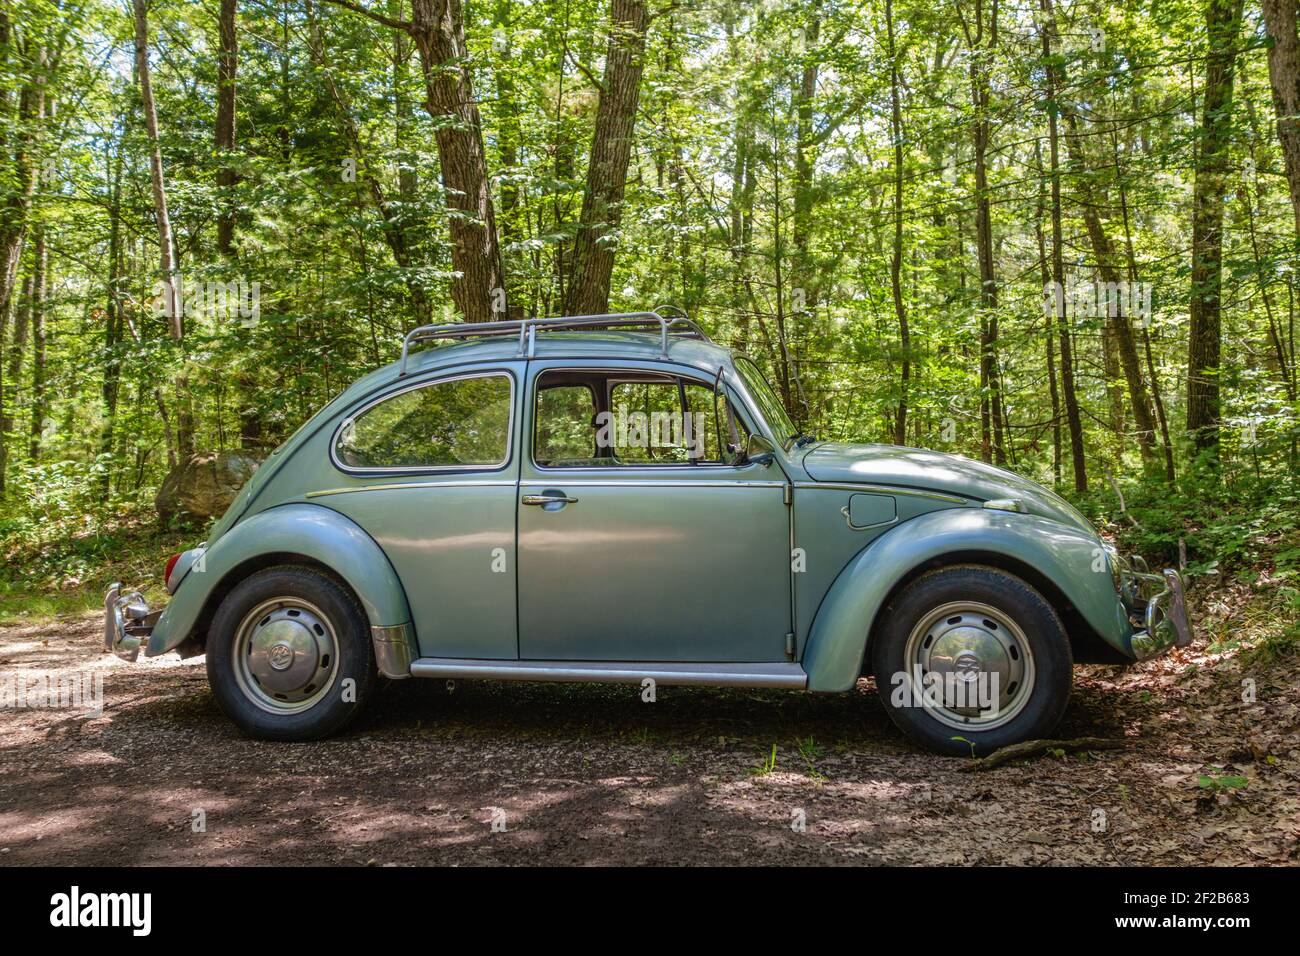 A classic, pale green Volkswagen Beetle car with trees in background. Stock Photo